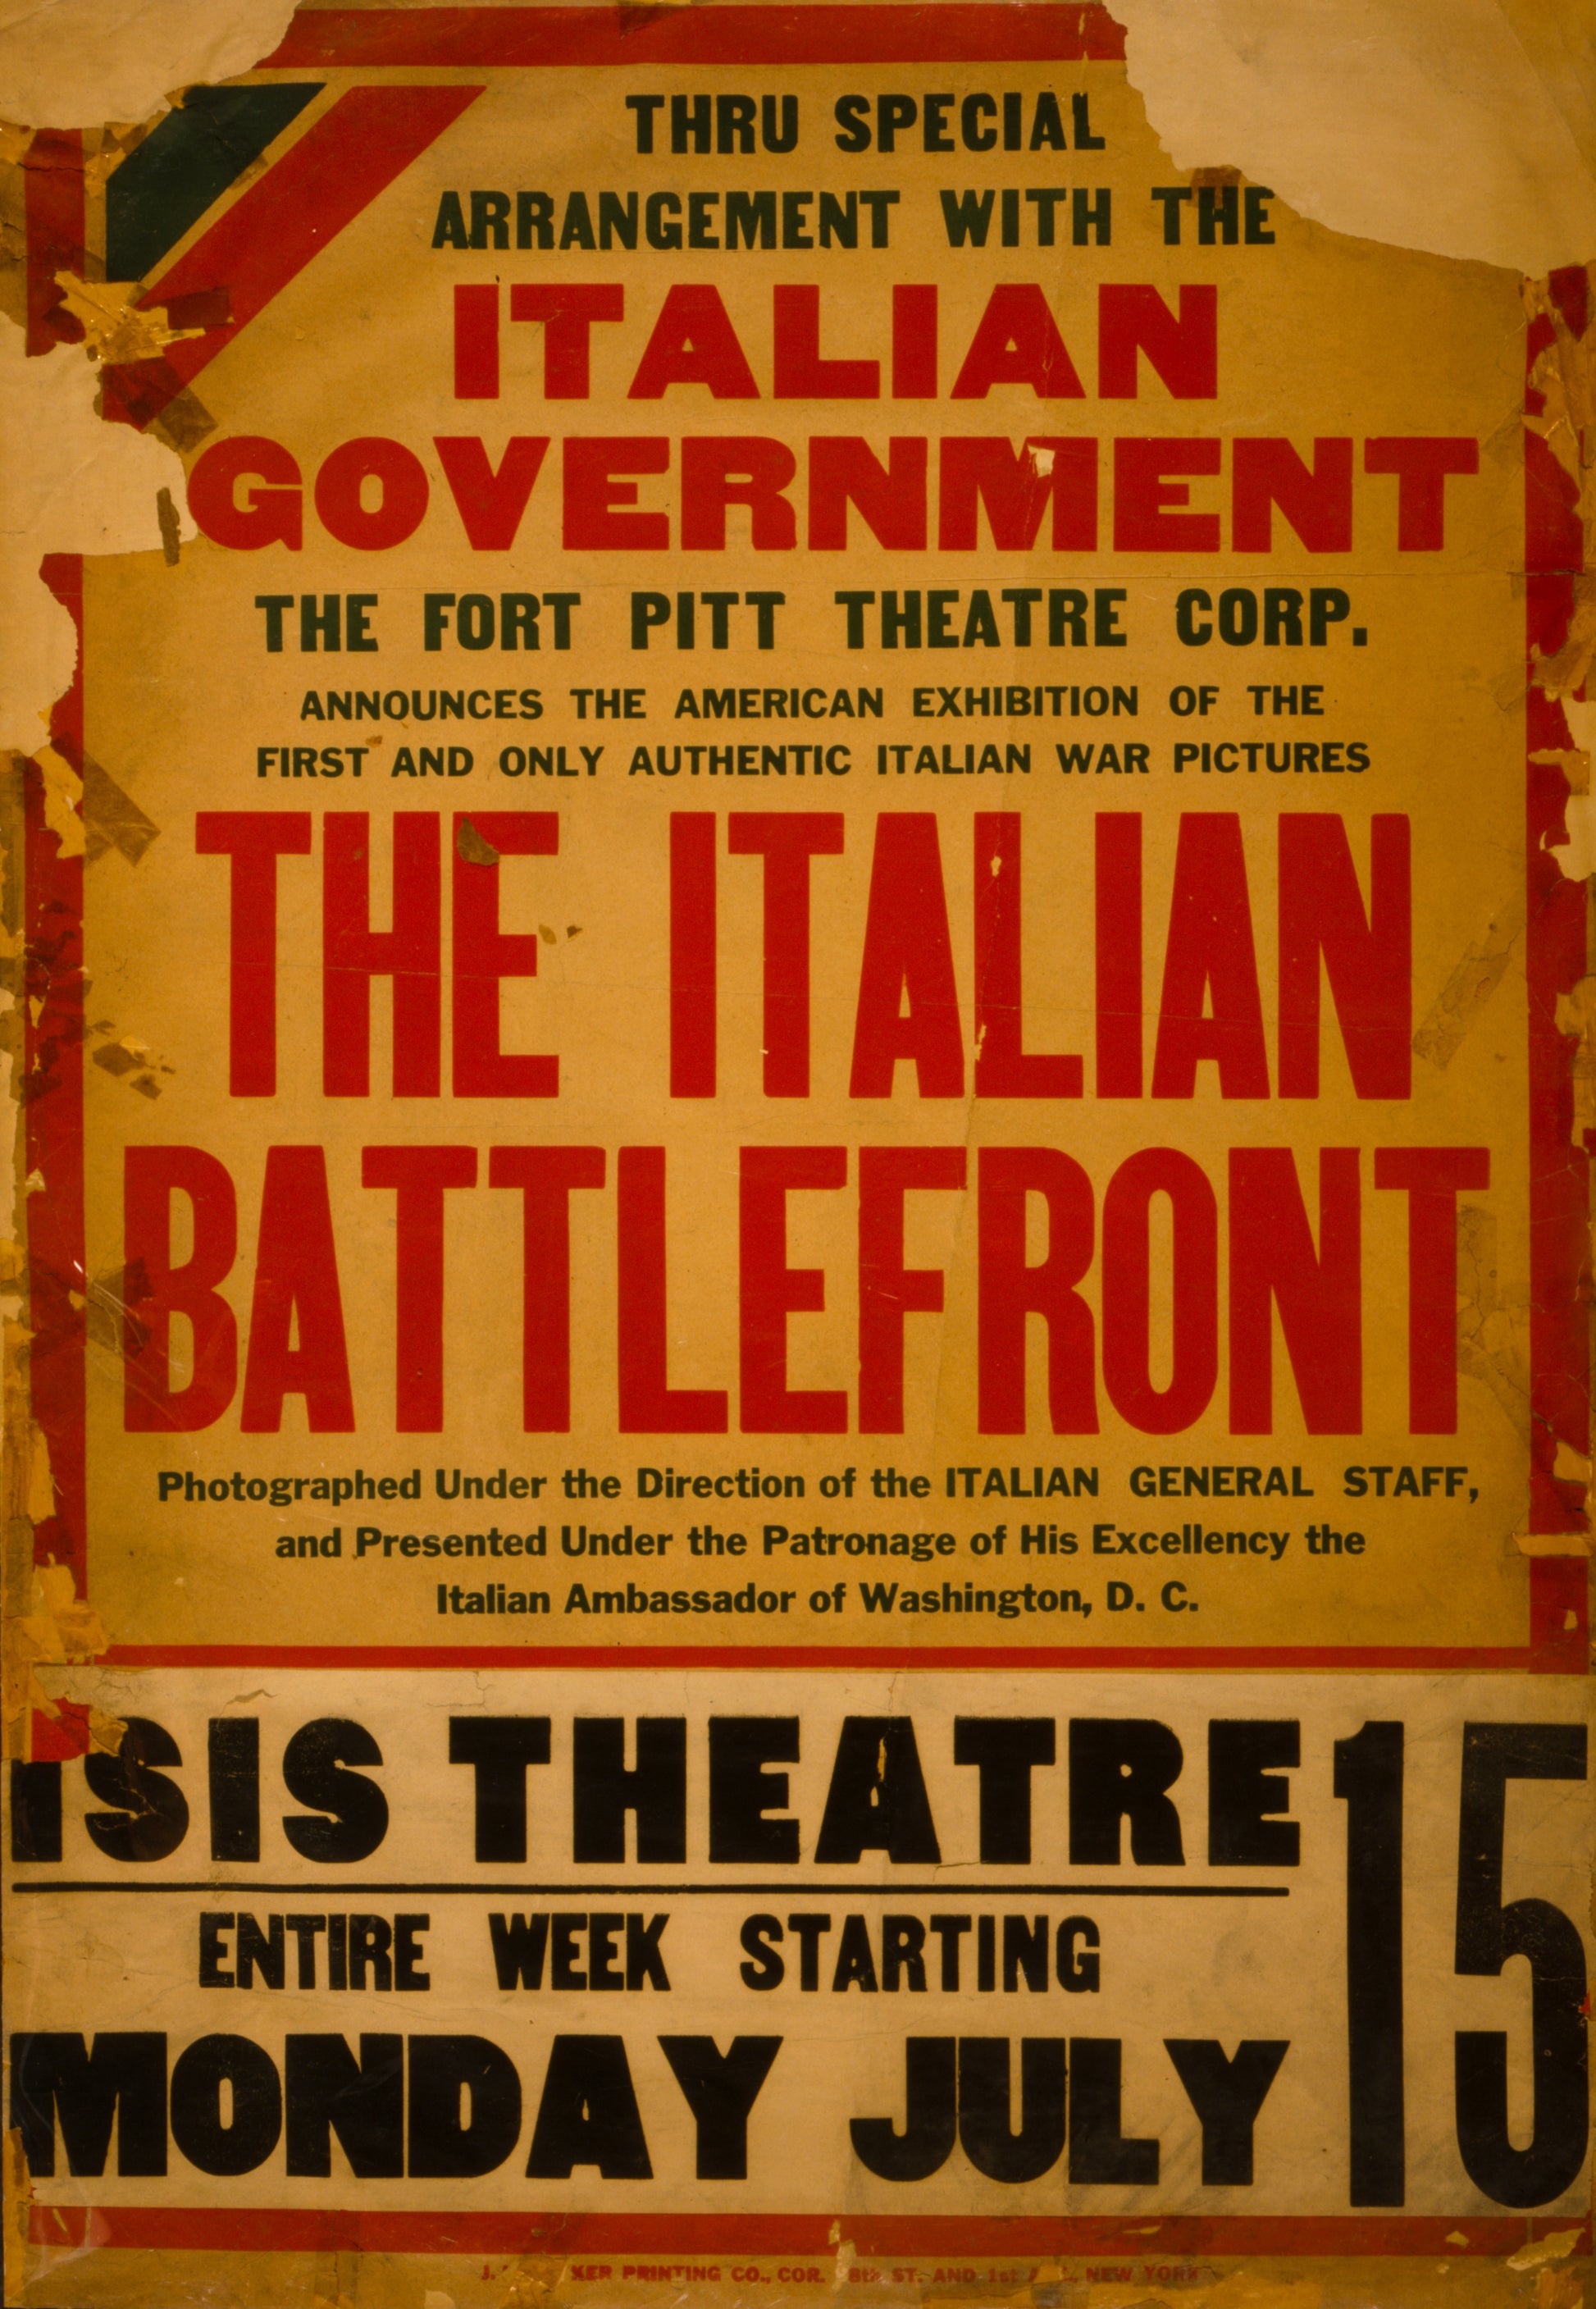 A picture of Thru special arrangement with the Italian government ... the Italian battlefront